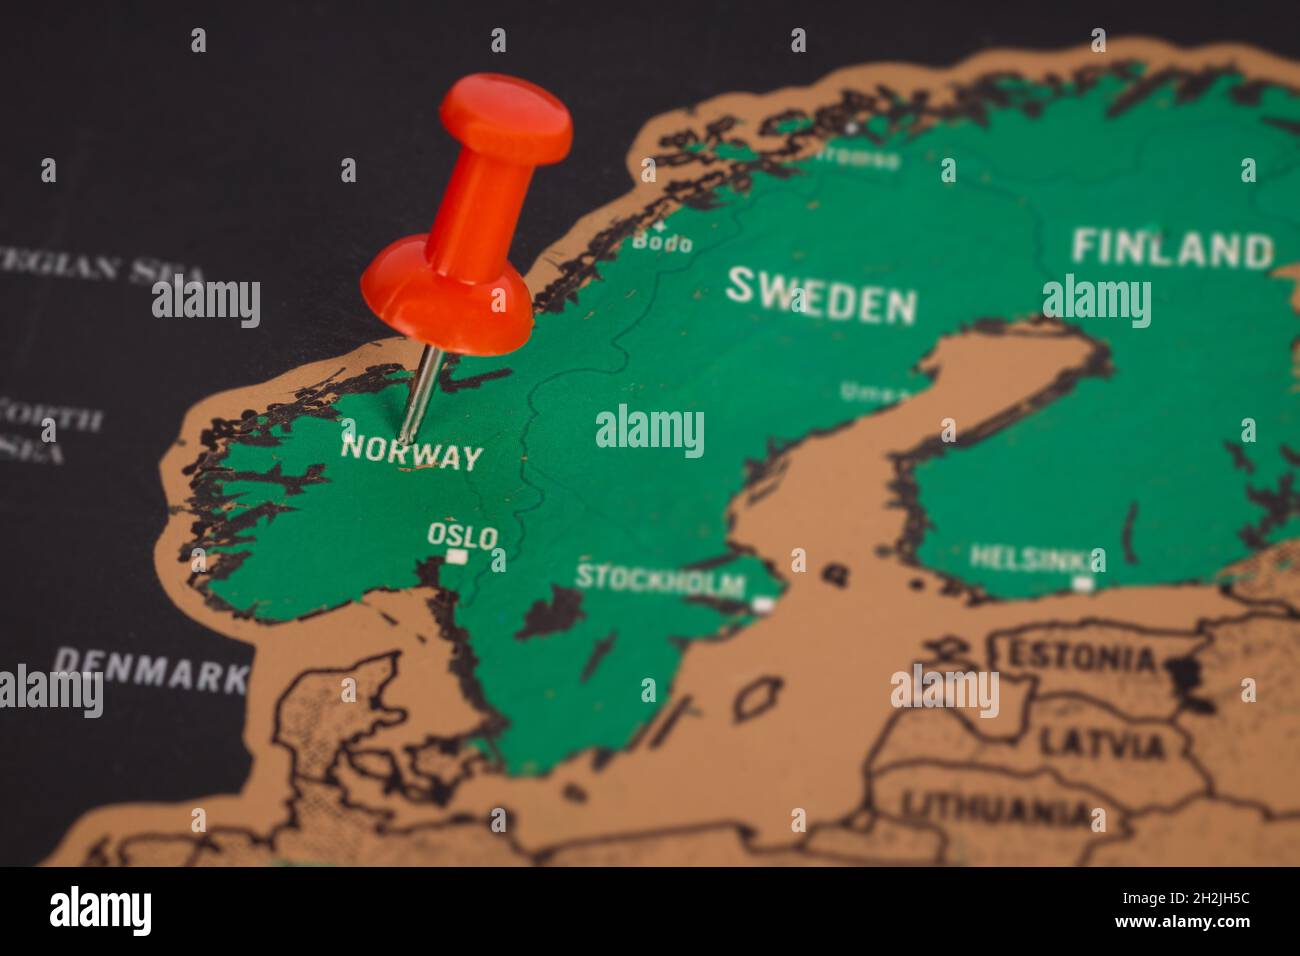 Location Norway Red Pin On The Map Stock Photo Alamy